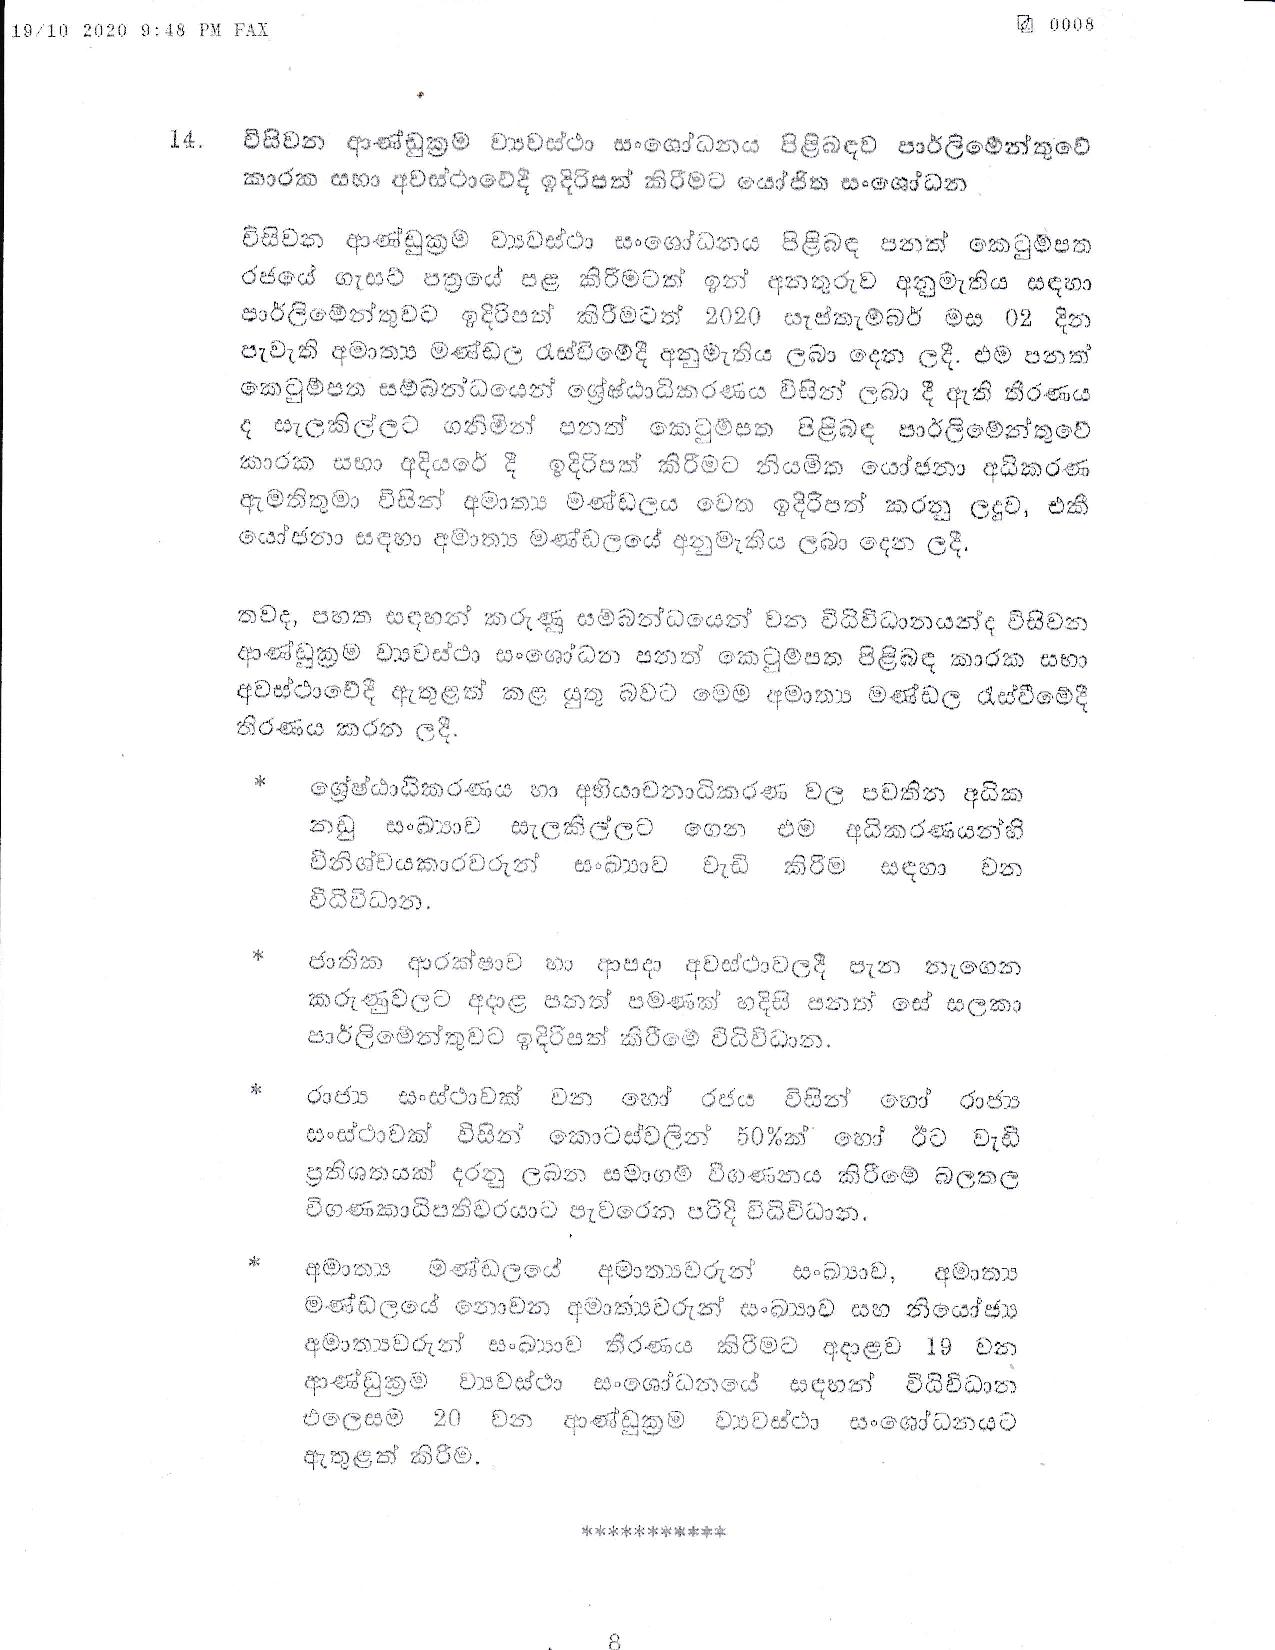 Cabinet Decision on 19.10.2020 page 008